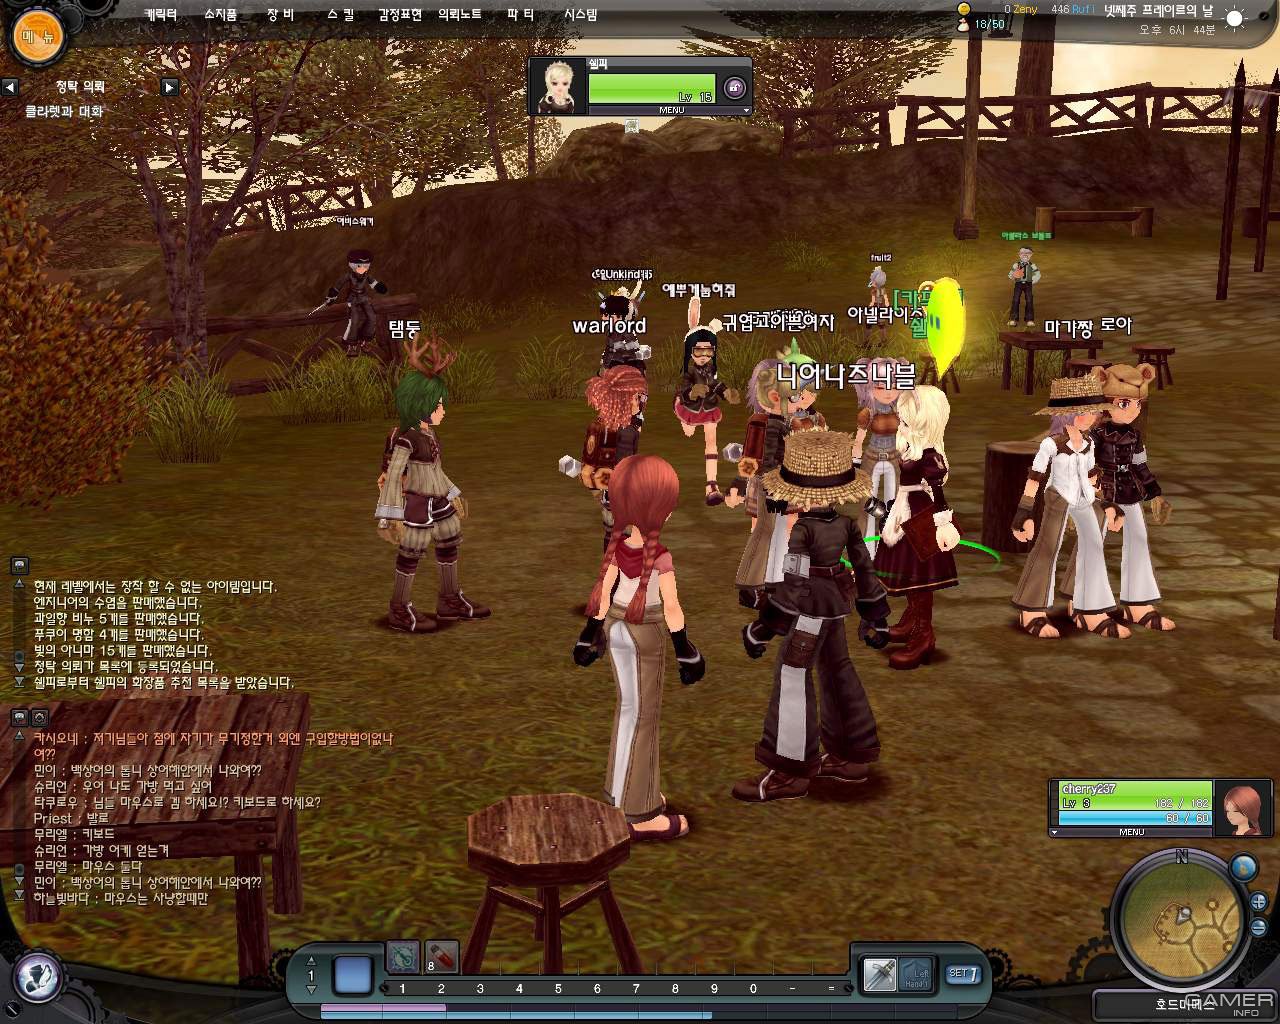 TGDB - Browse - Game - Ragnarok Online 2: Legend of the Second